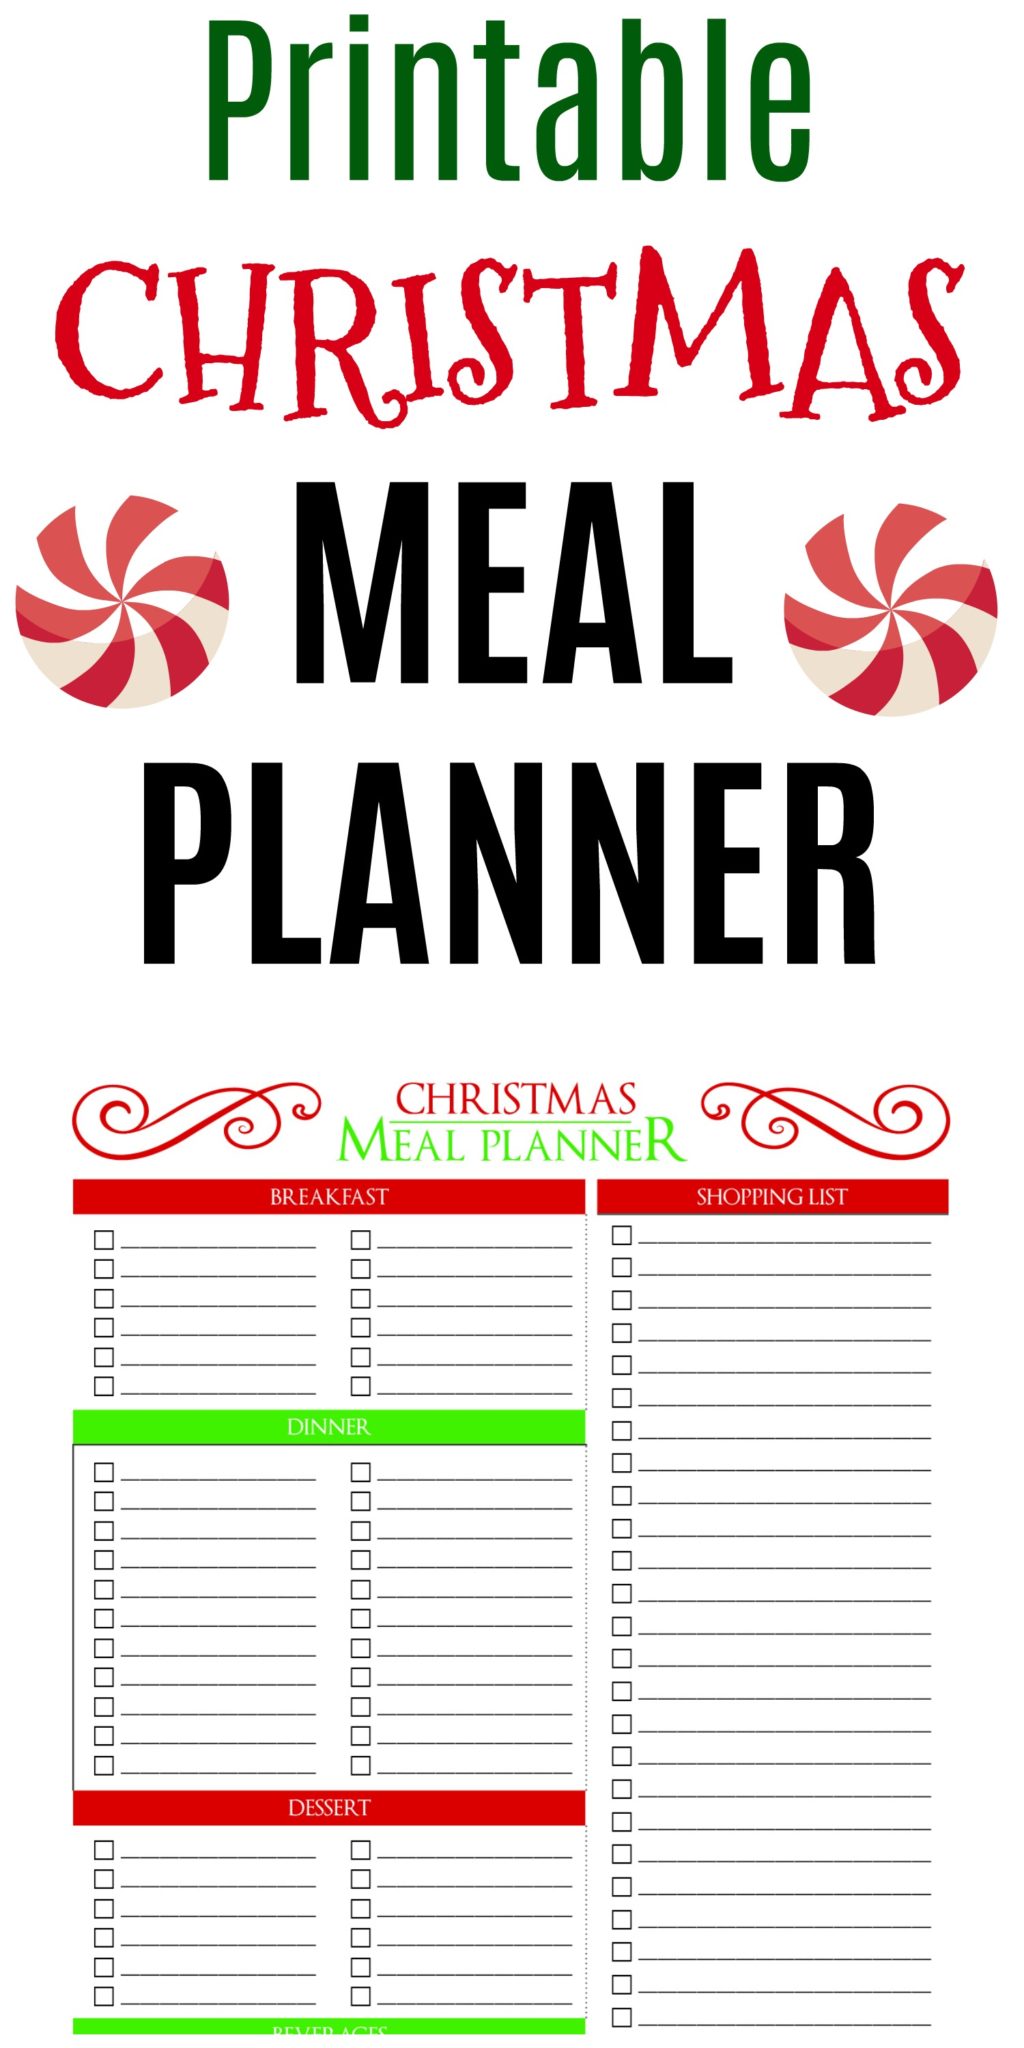 This Christmas meal planner will save your sanity! Be prepared for all of your holiday meals, from breakfast to dinner, with this printable meal planner.